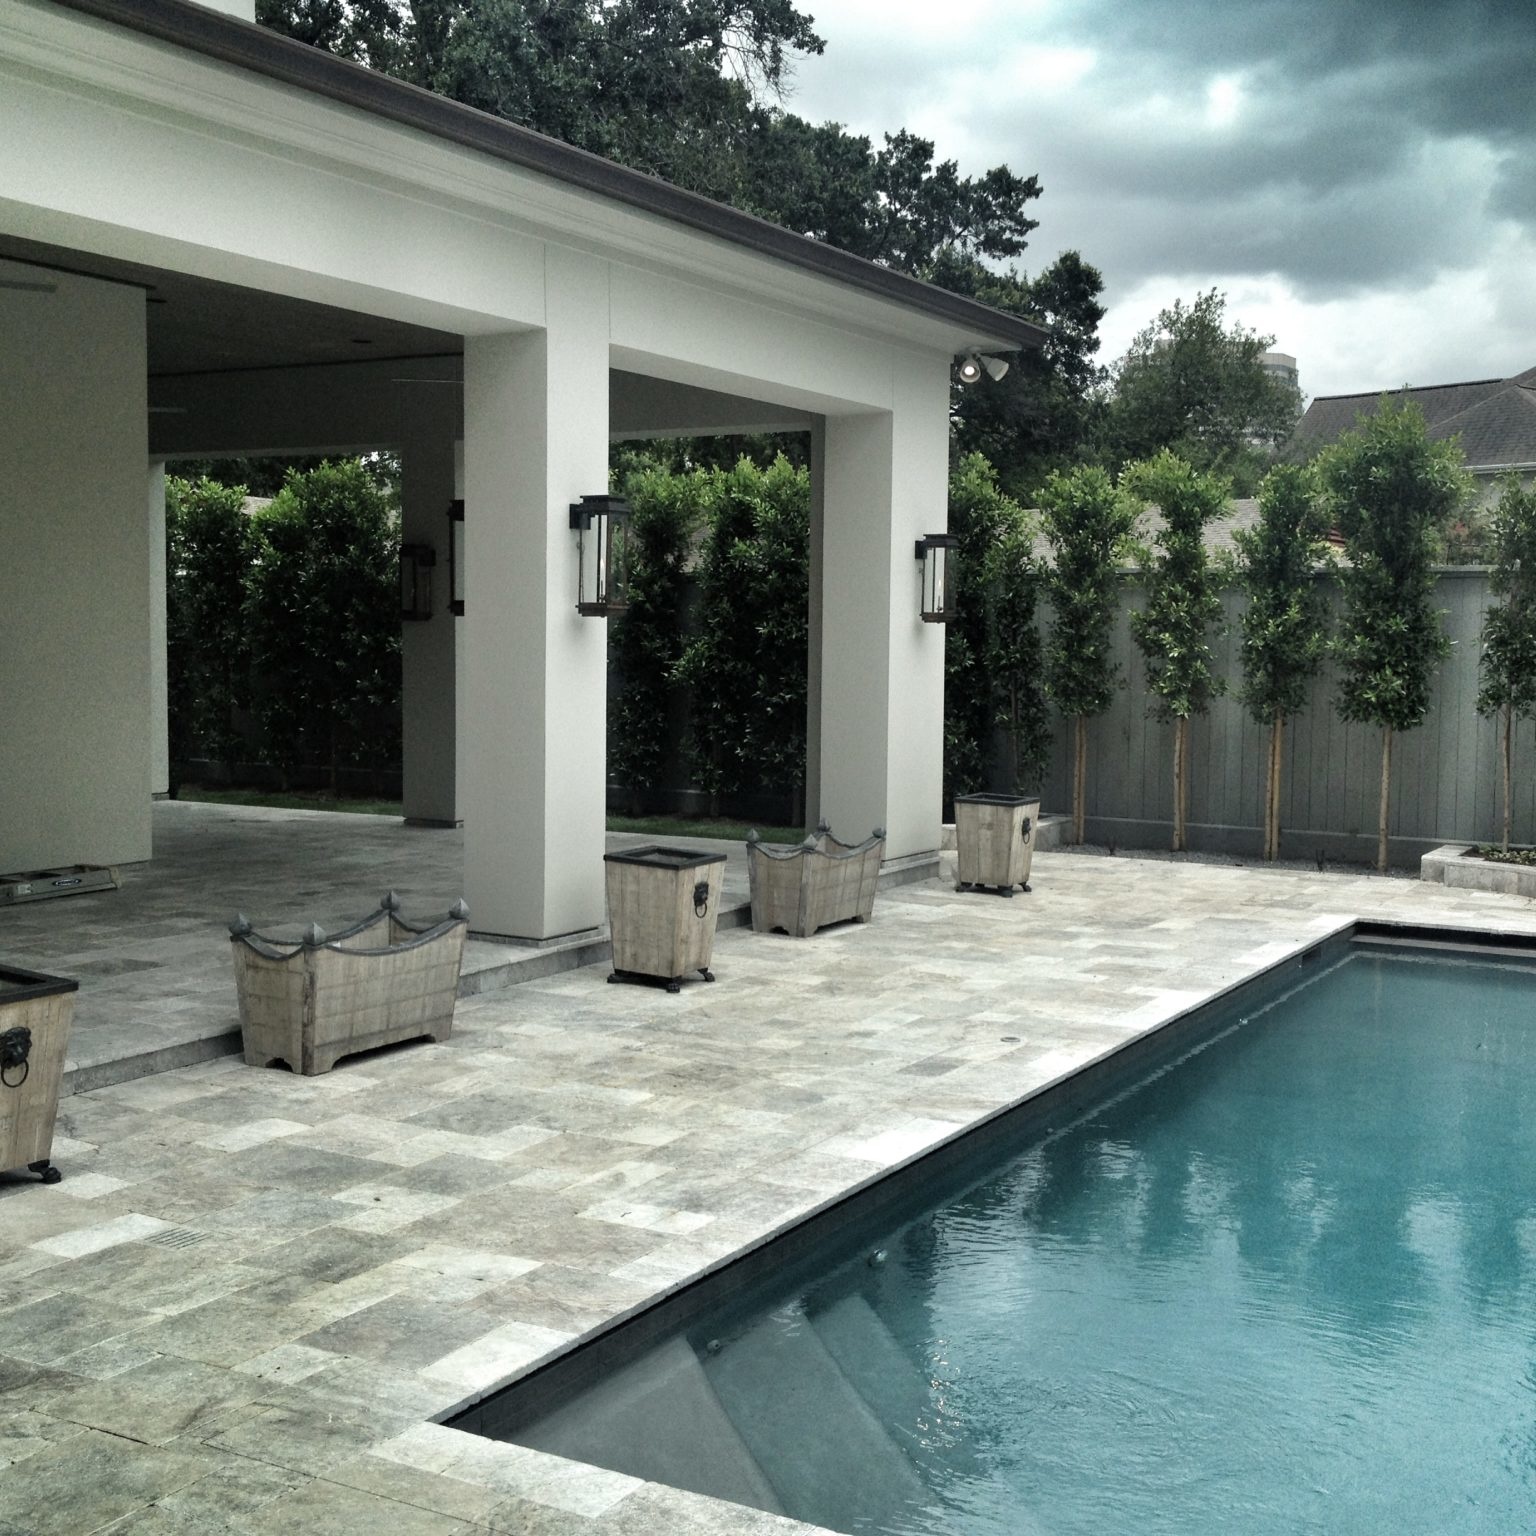 Outdoor pool and patio design